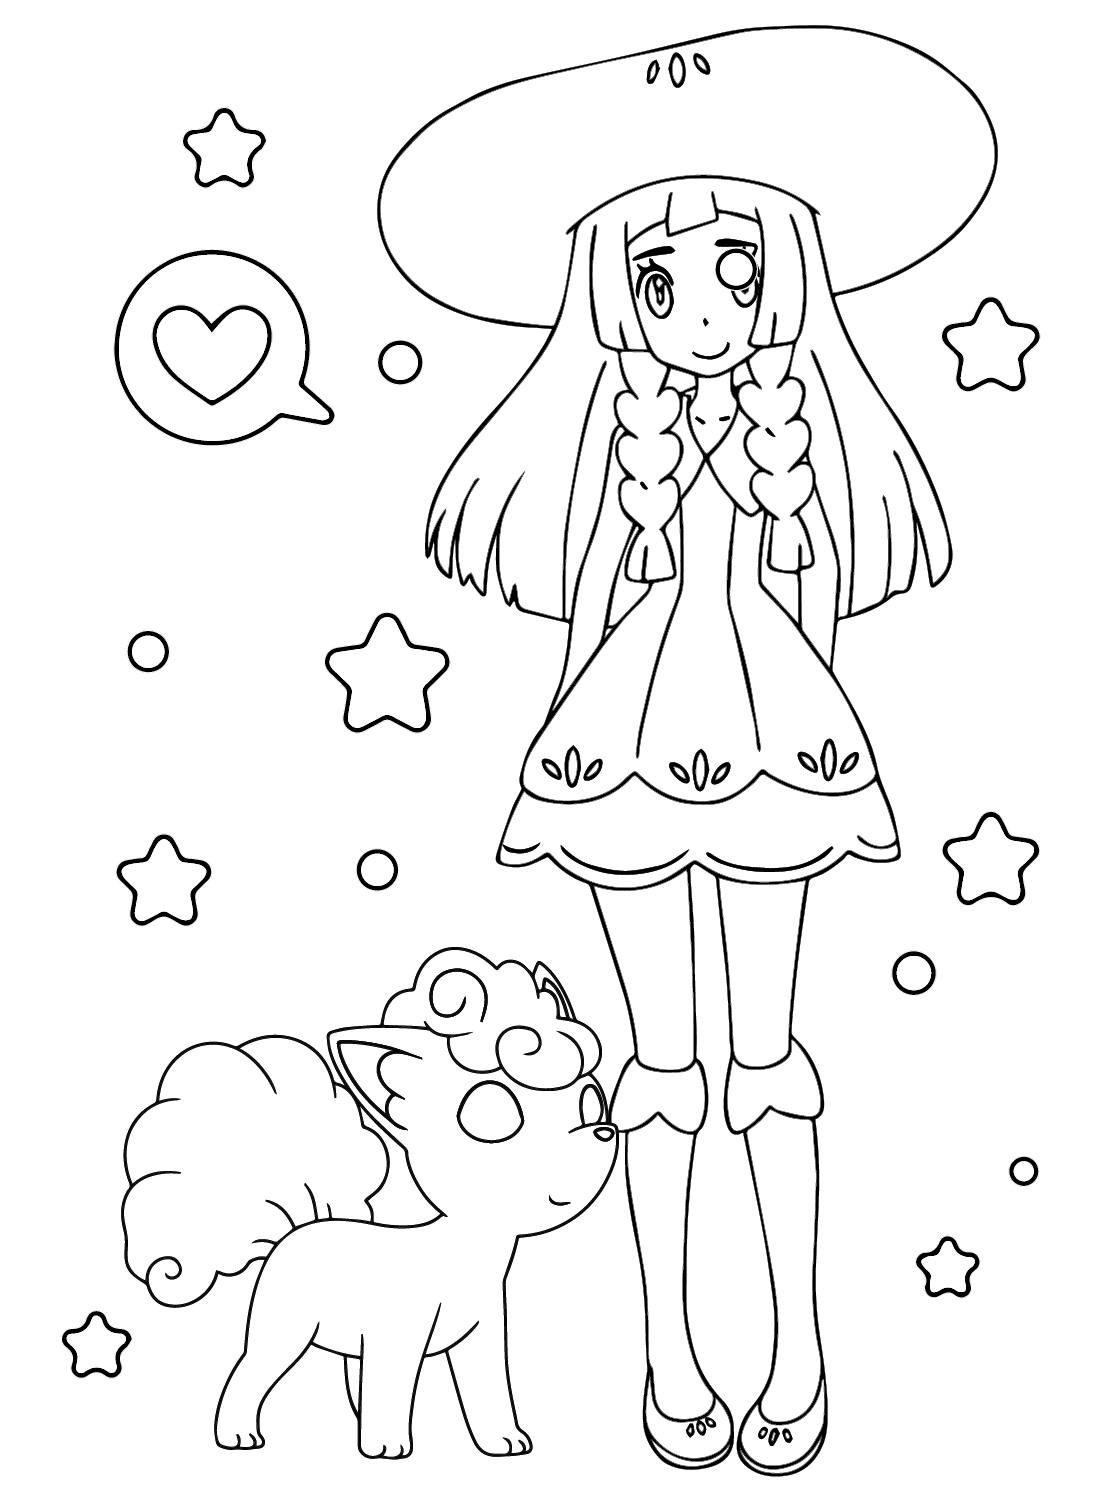 Lillie Pokemon Coloring Pages to Print from Lillie Pokemon